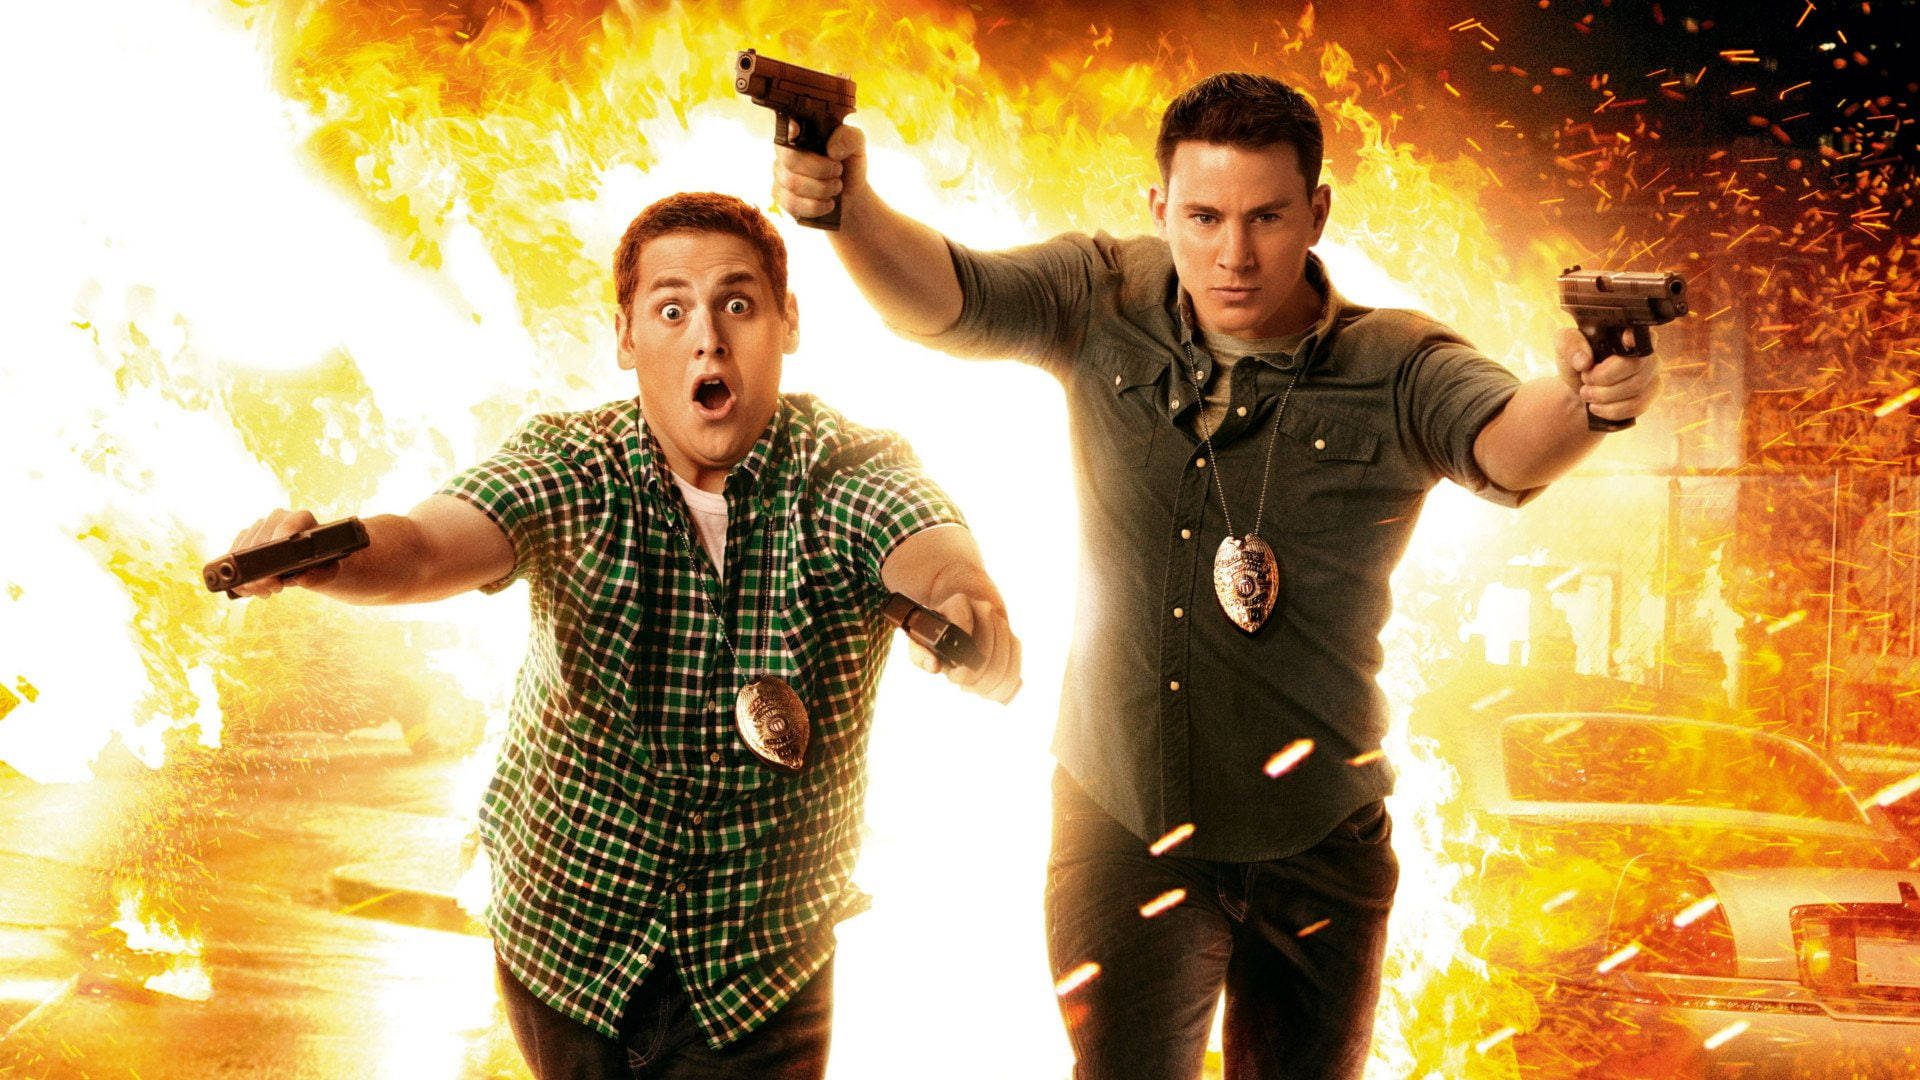 Hollywood Stars Channing Tatum And Jonah Hill In A Light-hearted Moment.